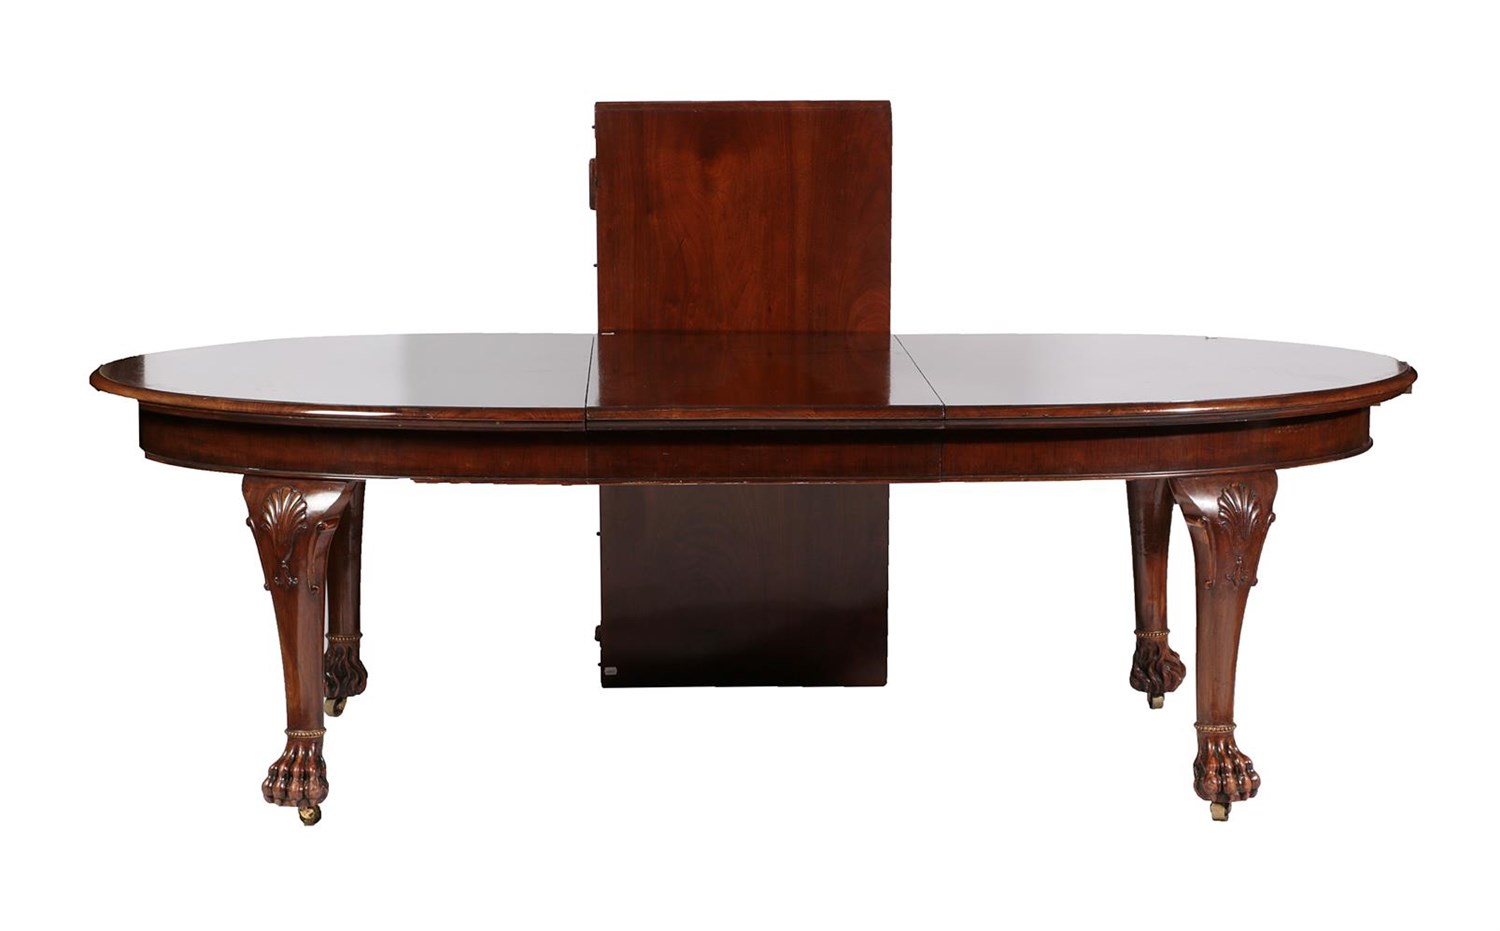 Lot 621 - A Late Victorian Mahogany Extending Dining Table, circa 1890, of D shape form, with two...